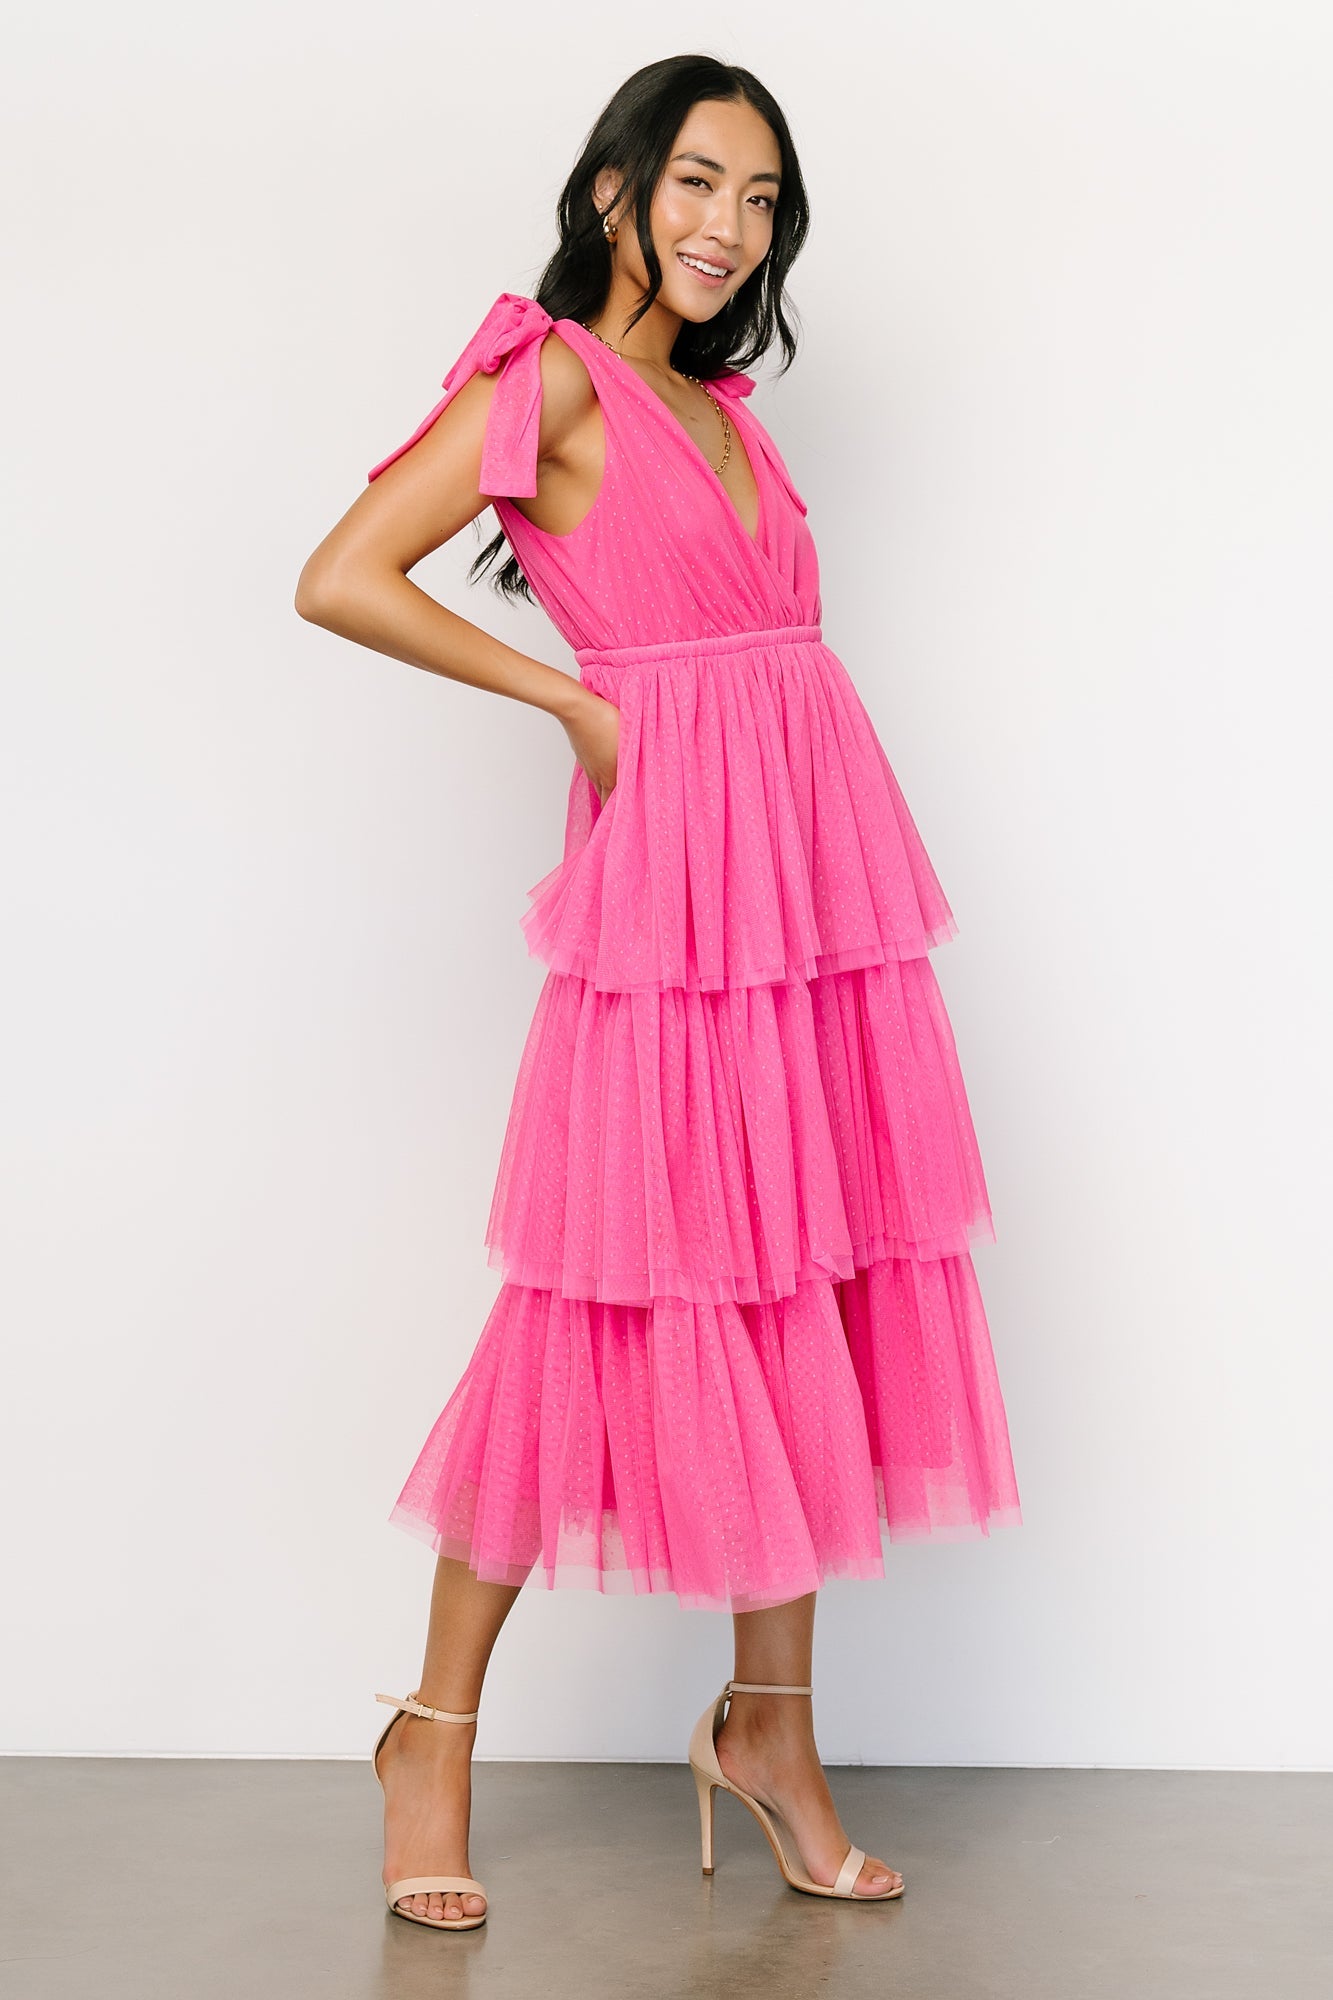 Paris Hot Pink Tulle Fabric – Tulle Source